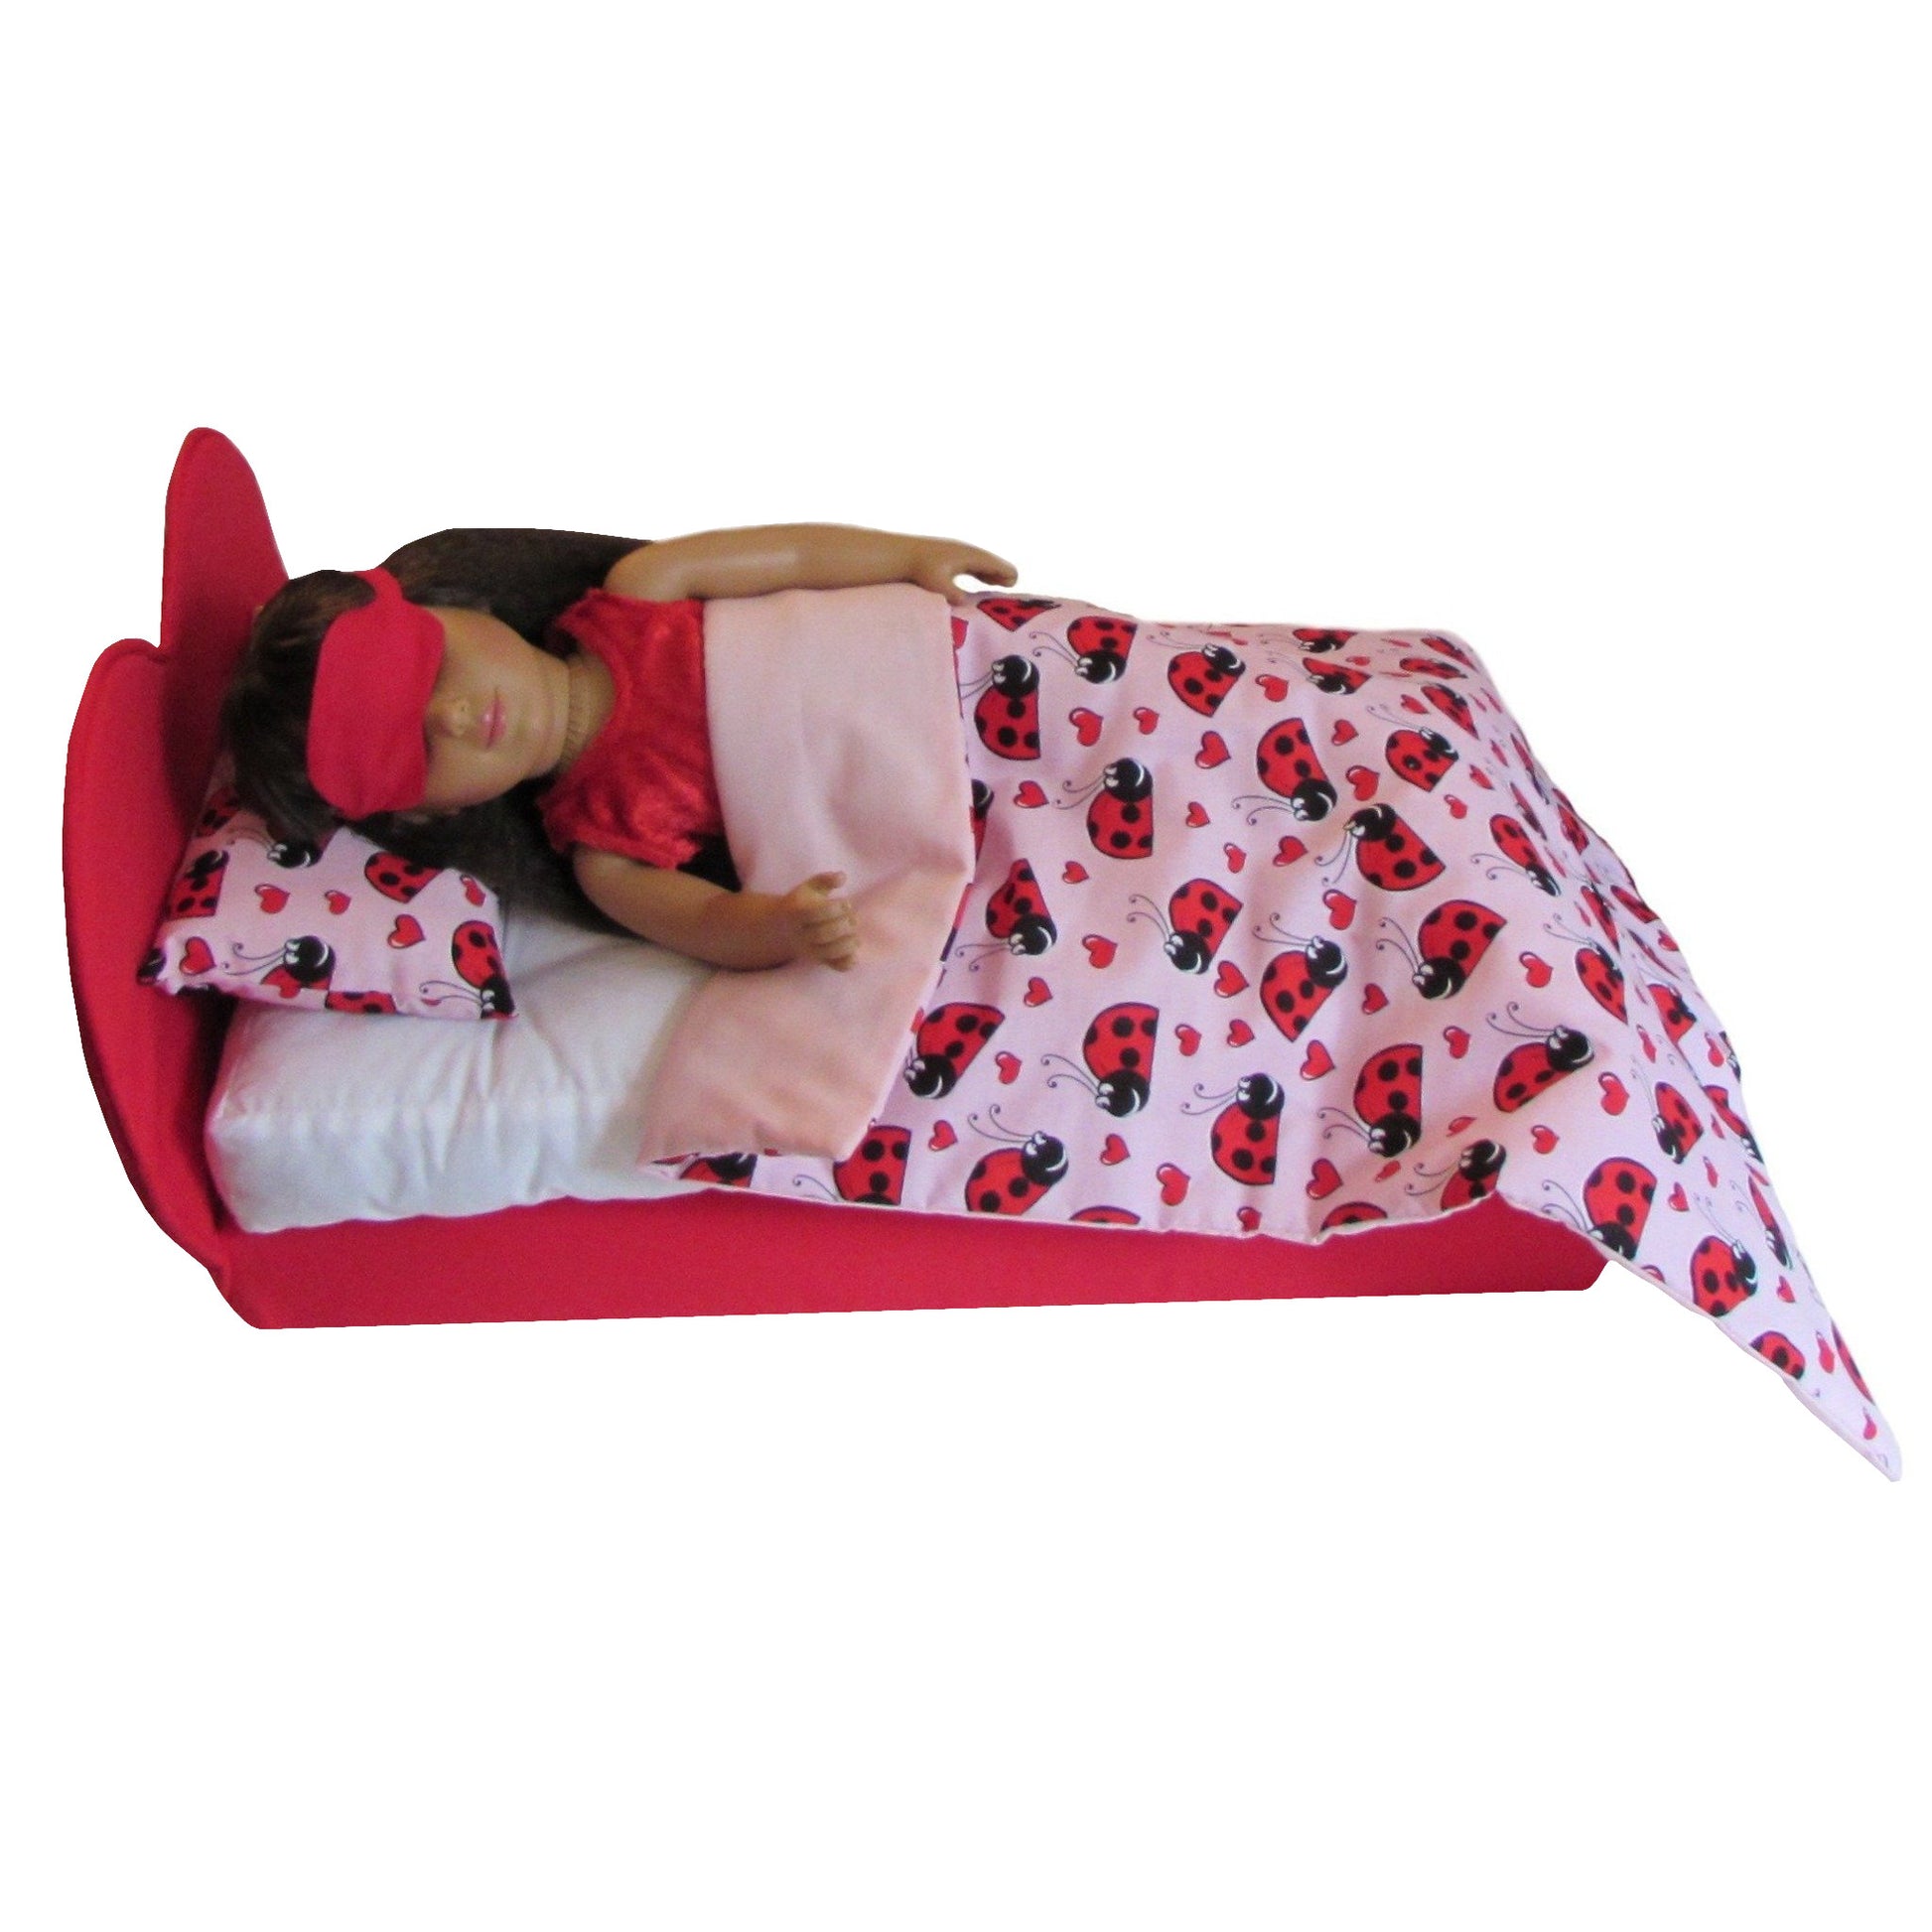 Pink Ladybug Hearts Doll Comforter Set, Red Heart Upholstered Doll Bed, Doll, and red eye mask for 18-inch dolls